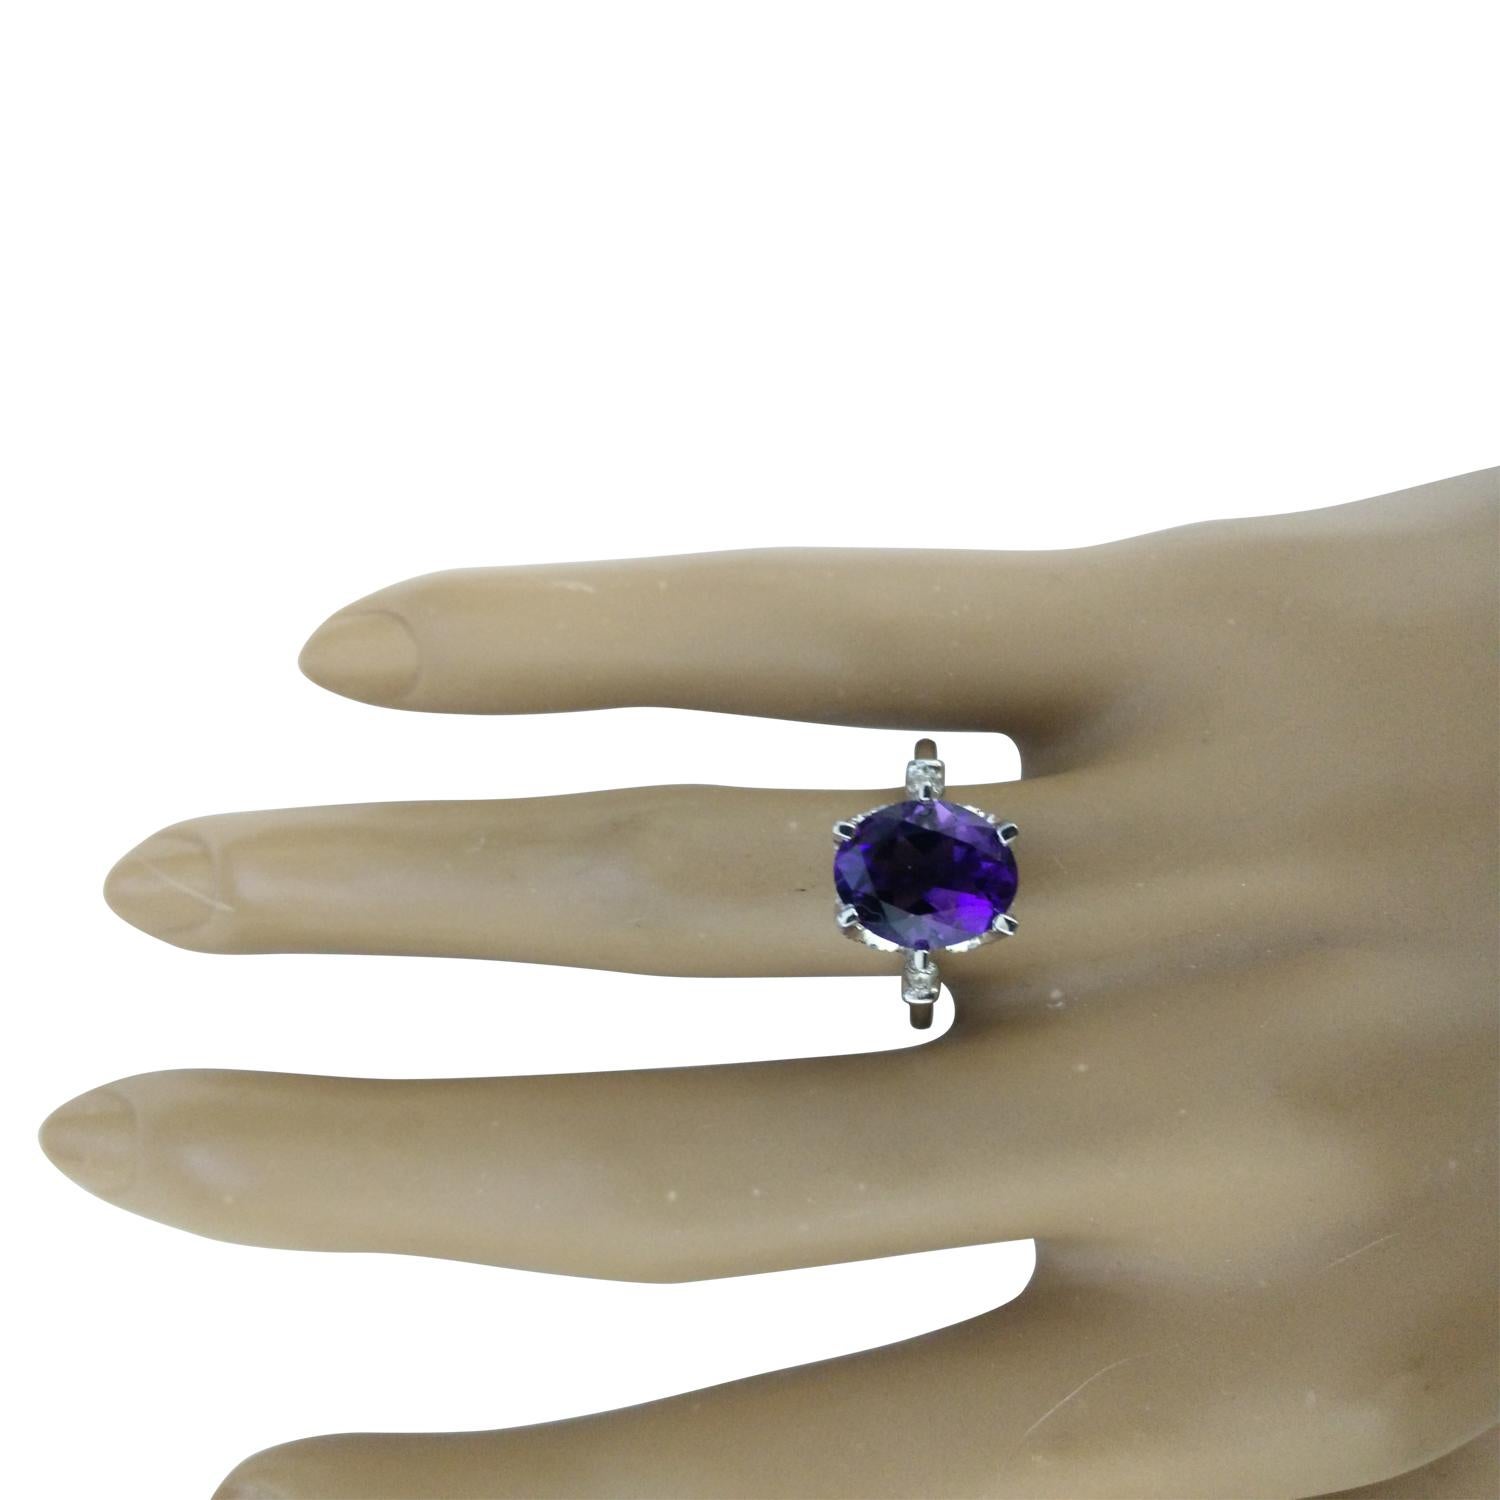 3.41 Carat Natural Amethyst 14 Karat Solid White Gold Diamond Ring
Stamped: 14K 
Total Ring Weight: 4.2 Grams 
Amethyst Weight: 3.26 Carat (11.00x9.00 Millimeters)  
Diamond Weight: 0.15 Carat (F-G Color, VS2-SI1 Clarity )
Quantity: 4
Face Measures: